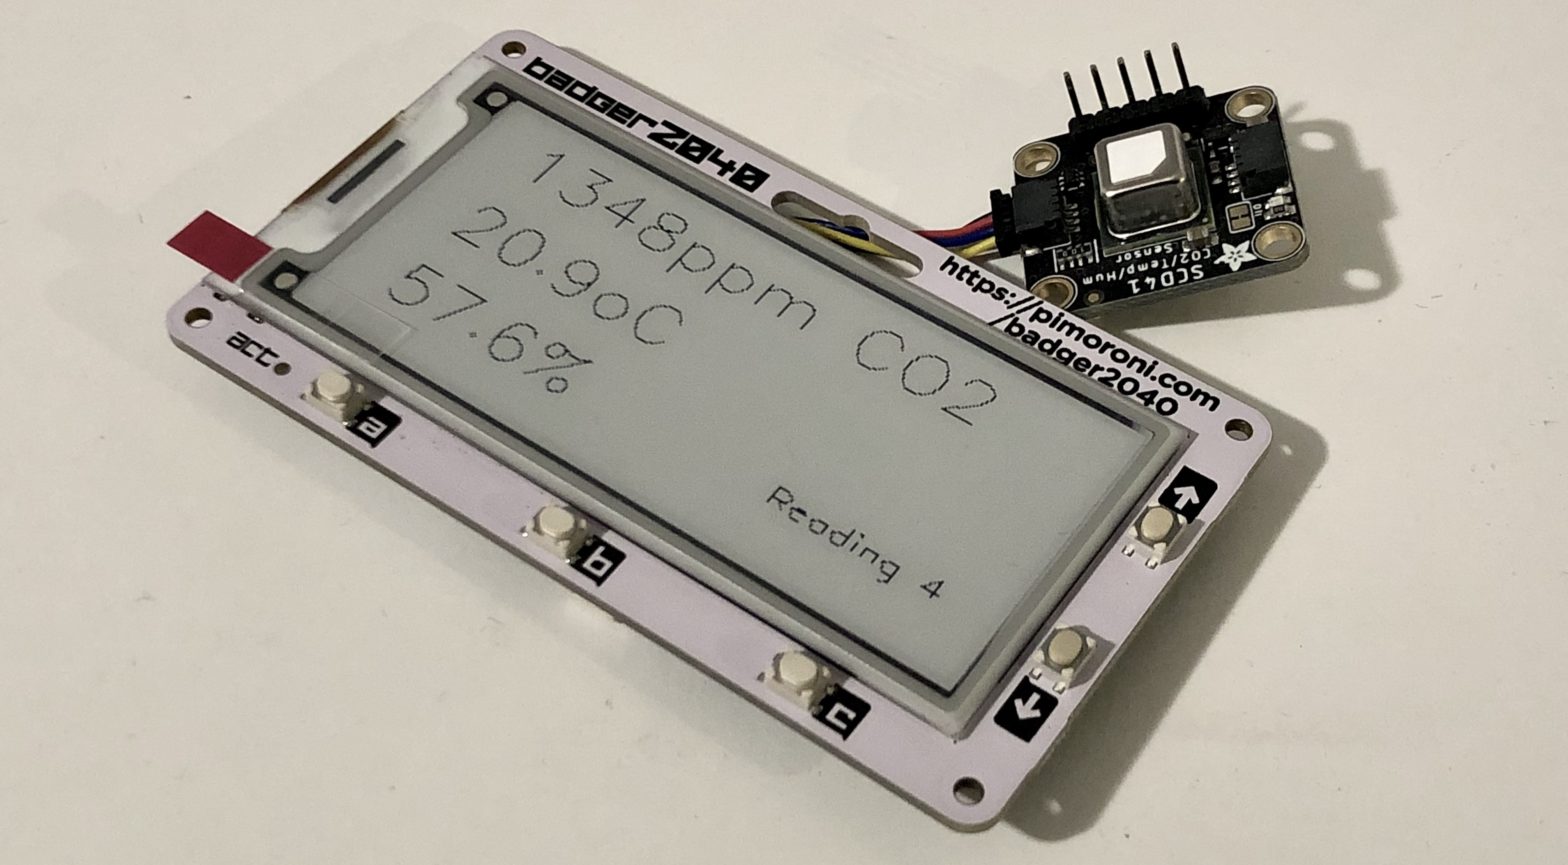 A photograph of the Badger2040 e-ink display connected via a Qwiic cable to an SCD-41 Carbon Dioxide sensor